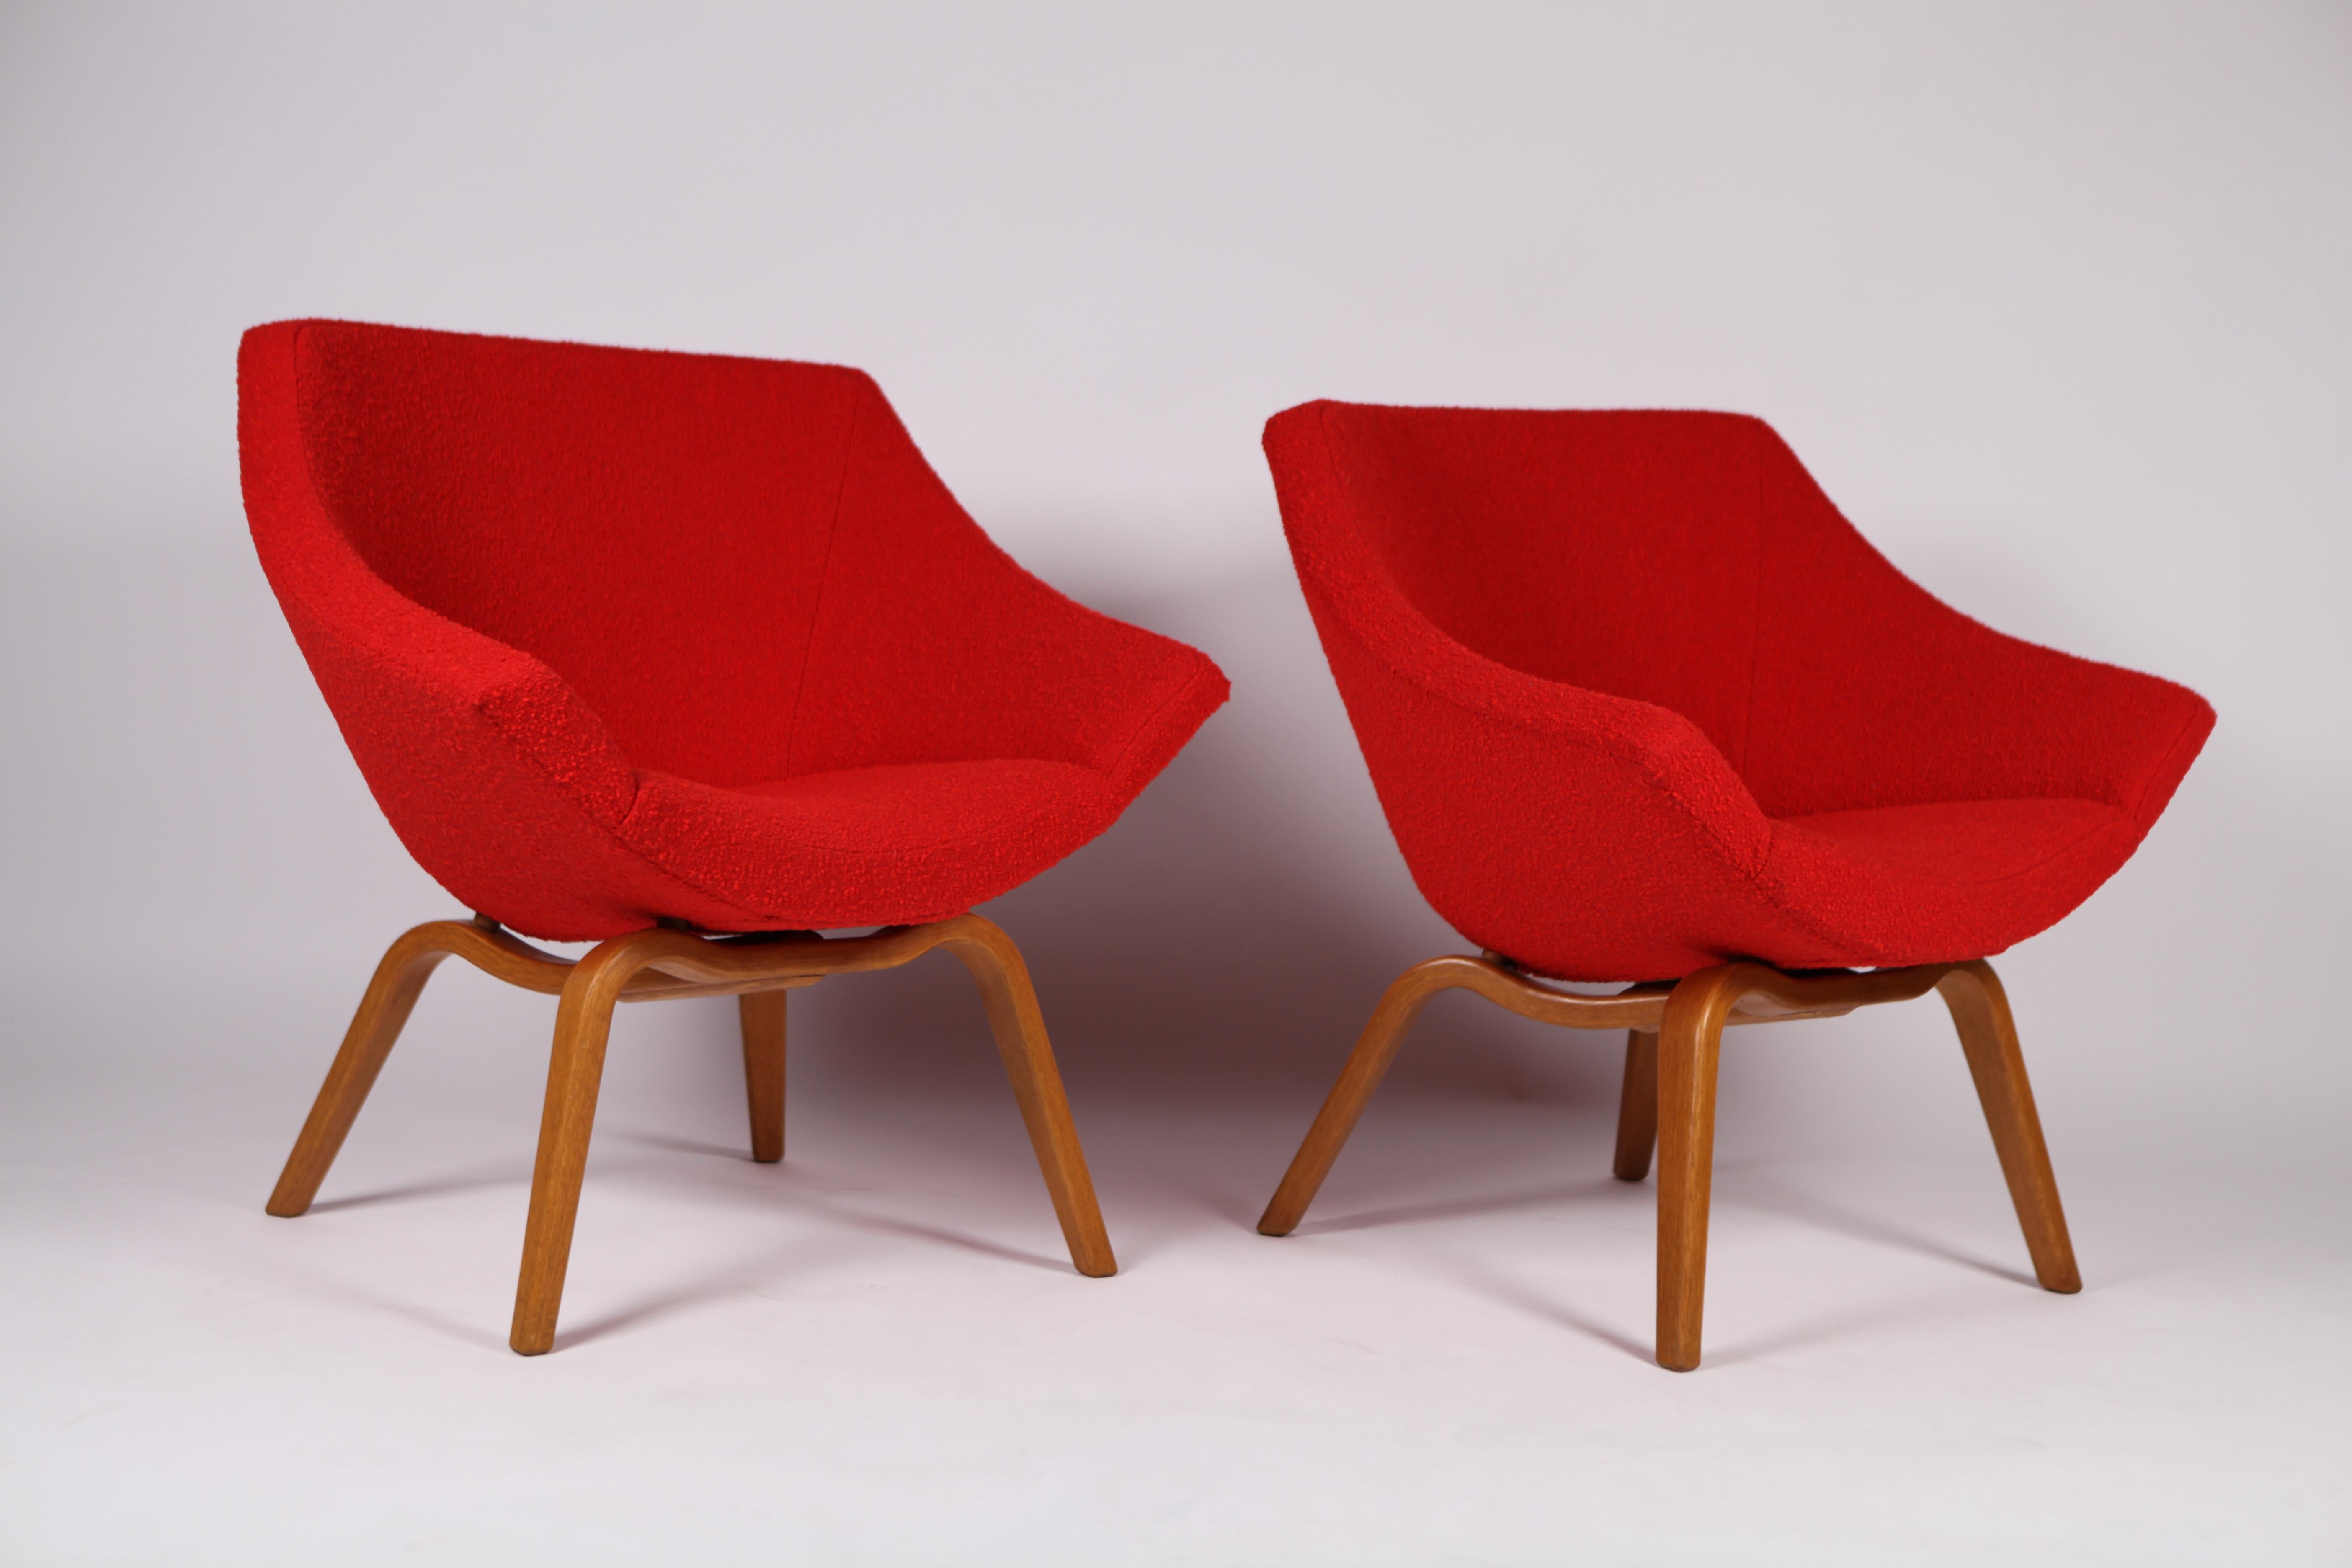 Pair of unique lounge chairs by Finnish designer and architect Carl-Gustaf Hiort af Ornäs (1911-1996), for Puunveisto, Helsinki 1950s.
Excellent vintage condition to the wood construction and new upholstery with Dedar fabric.
Signed to the